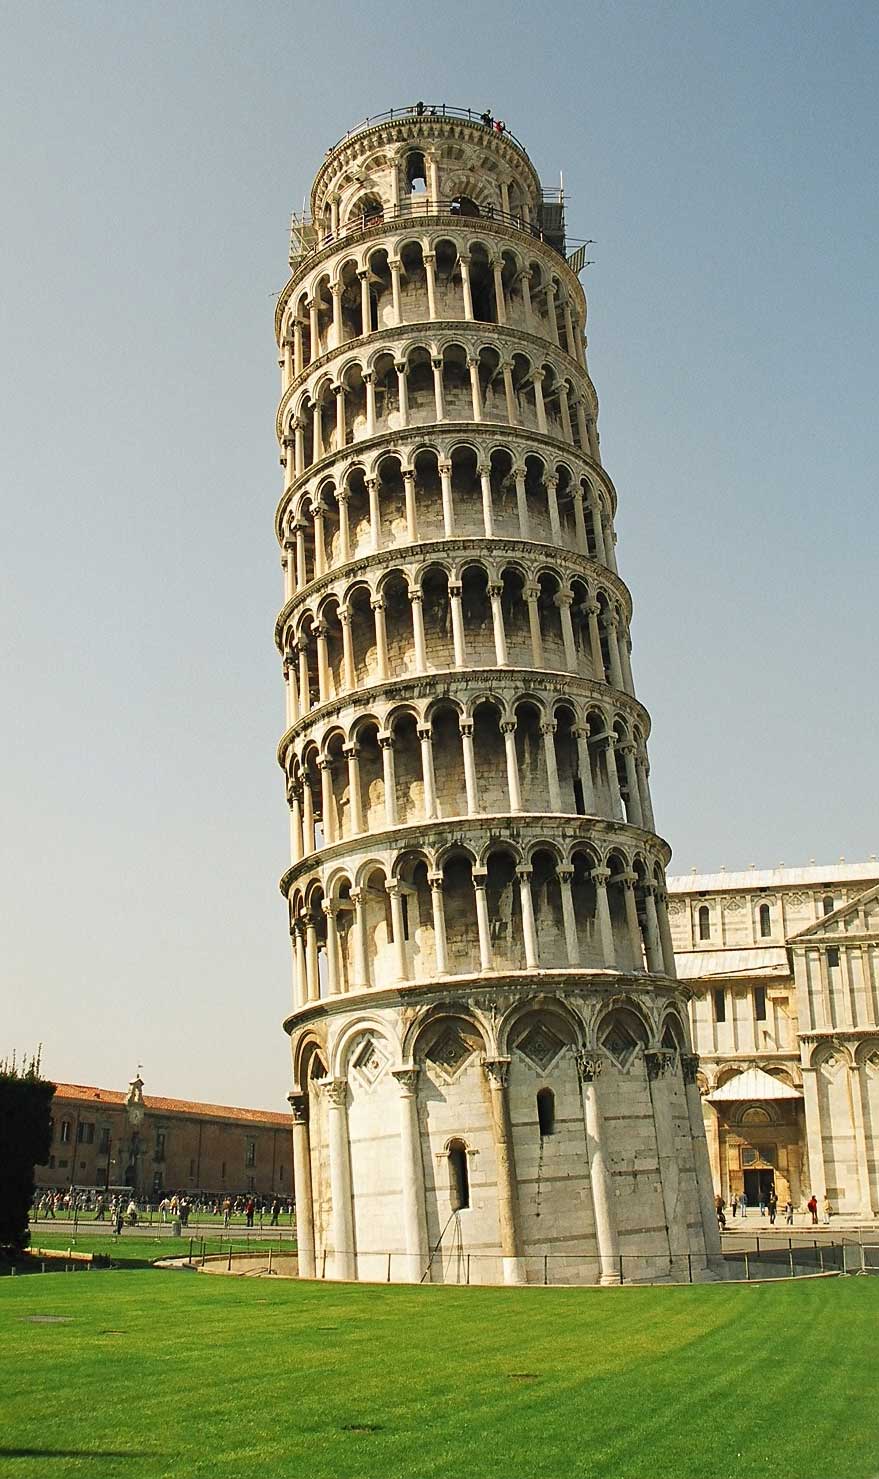 Visitor For Travel: Amazing Leaning Tower of Pisa, Italy HD Wallpaper